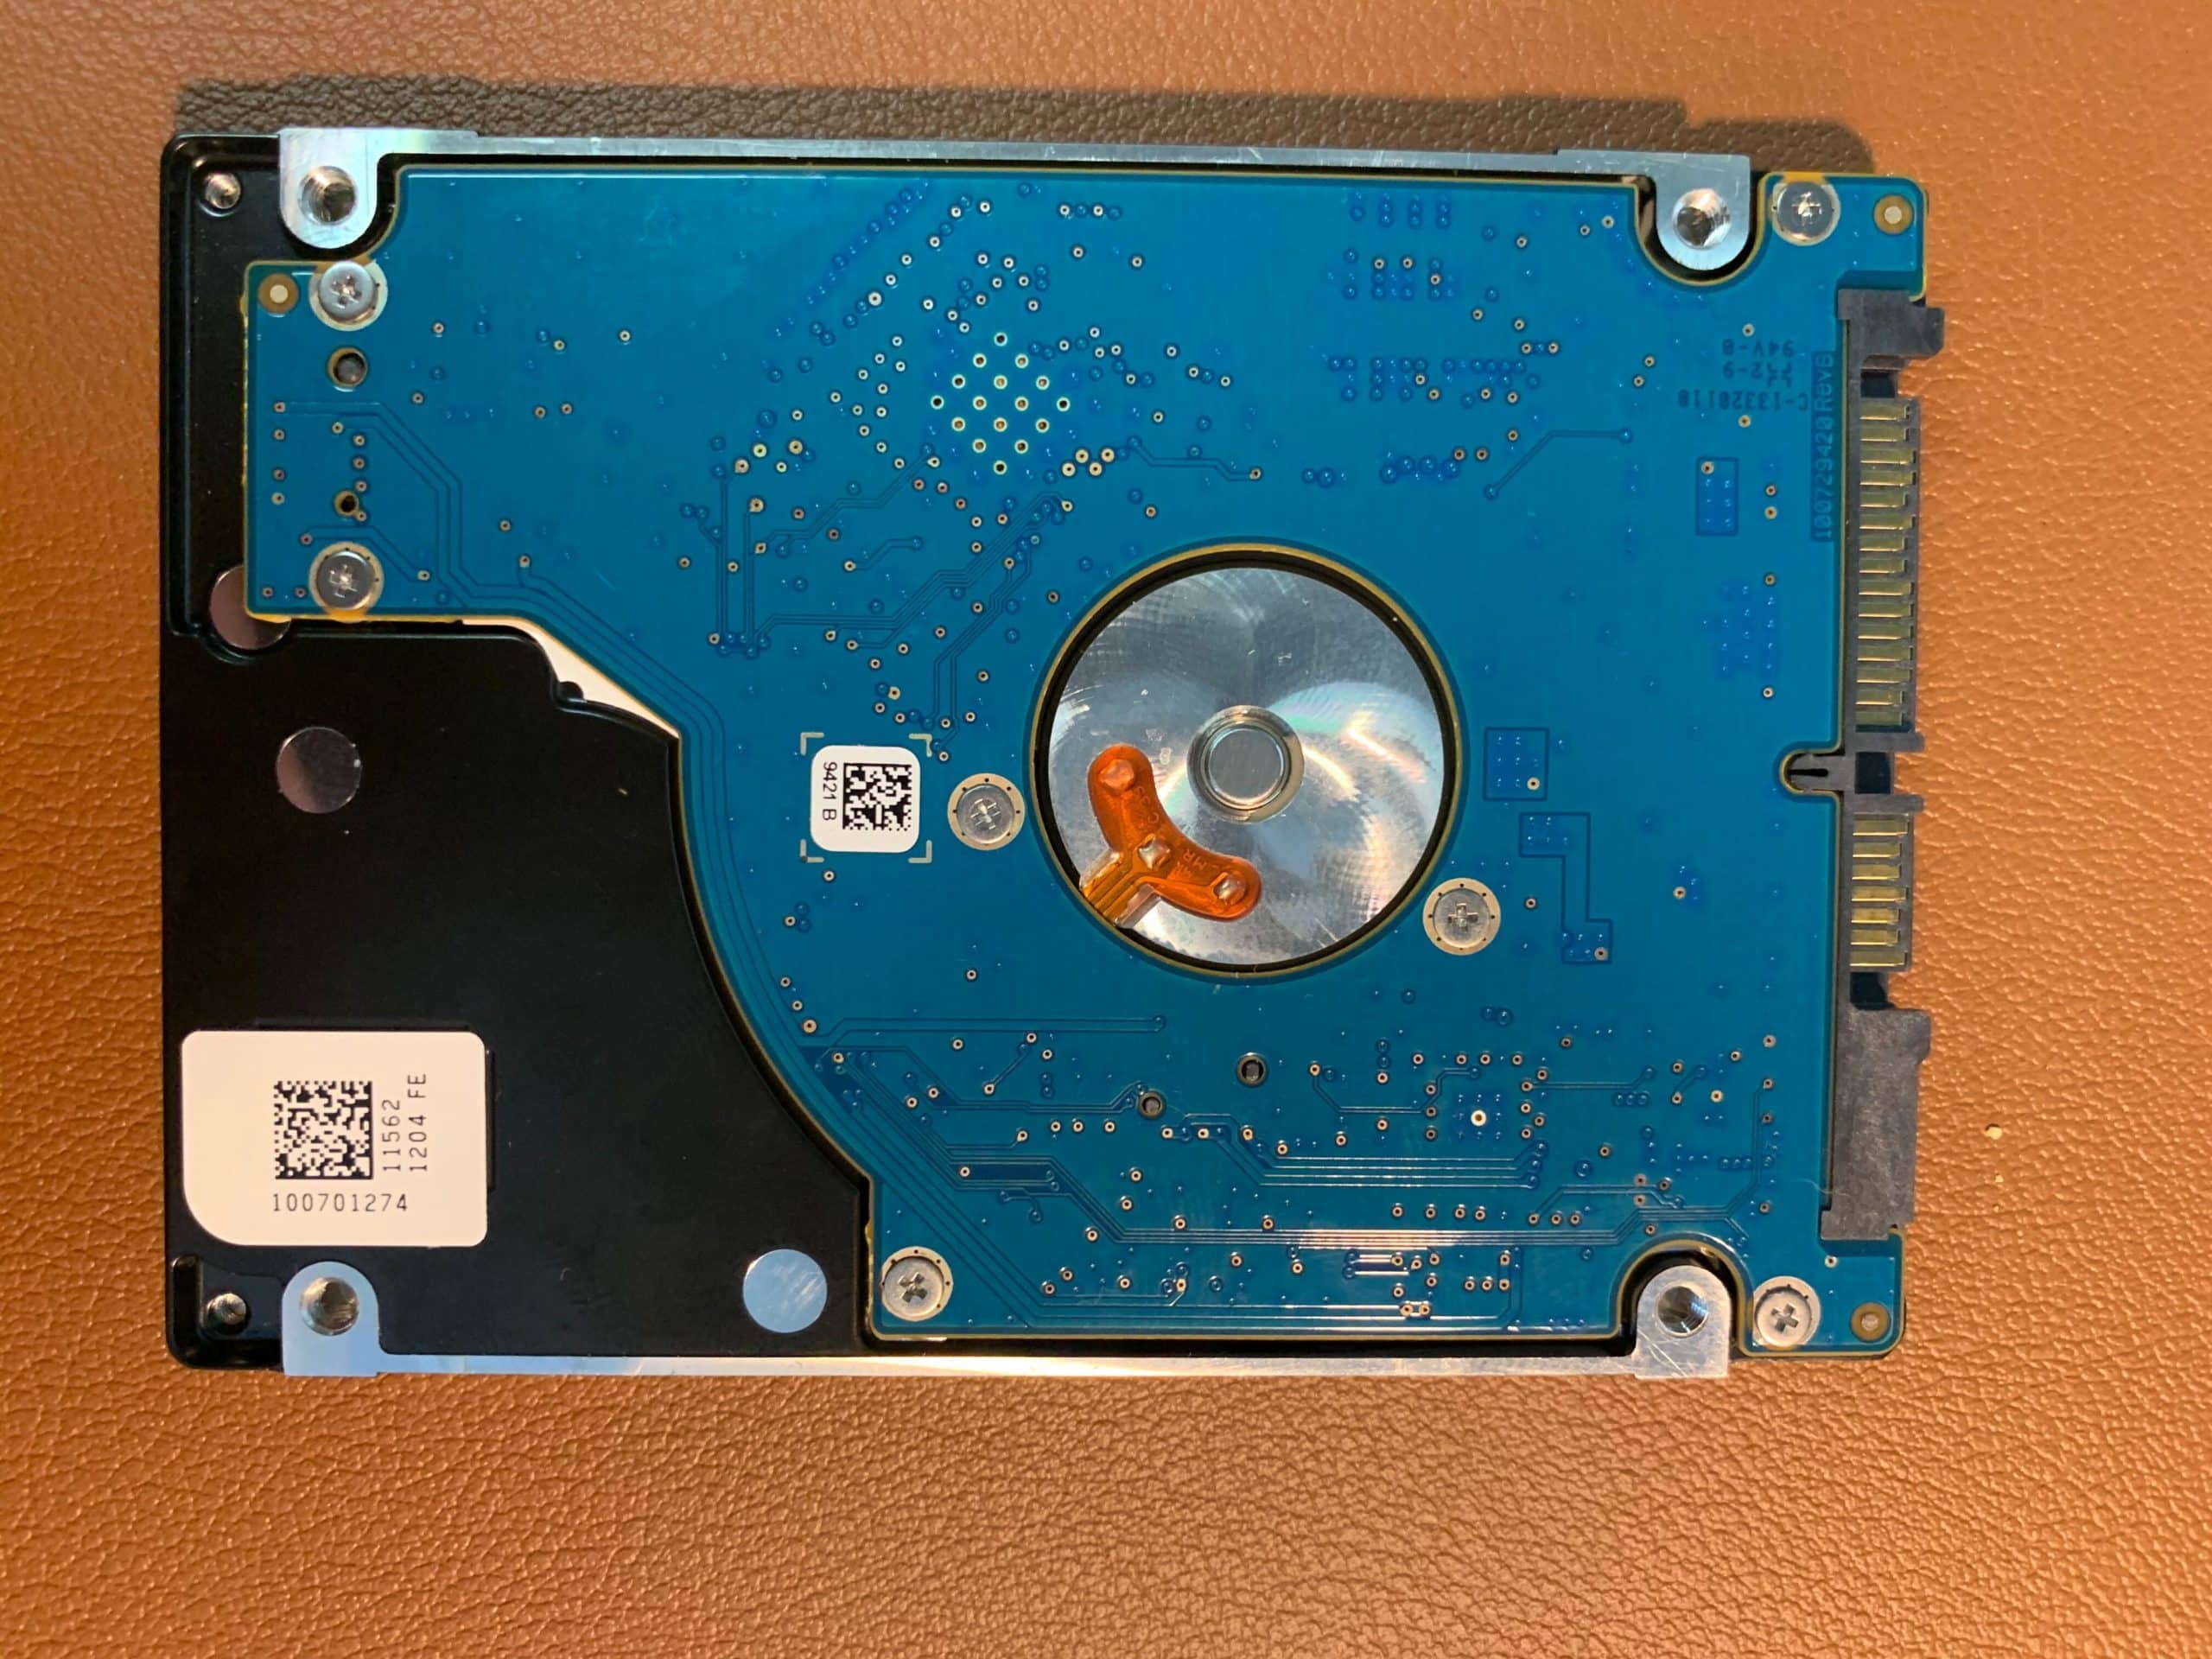 ST500LT012 Hard Drive Makes Clicking Noise and Won't Boot - Seagate Data Recovery